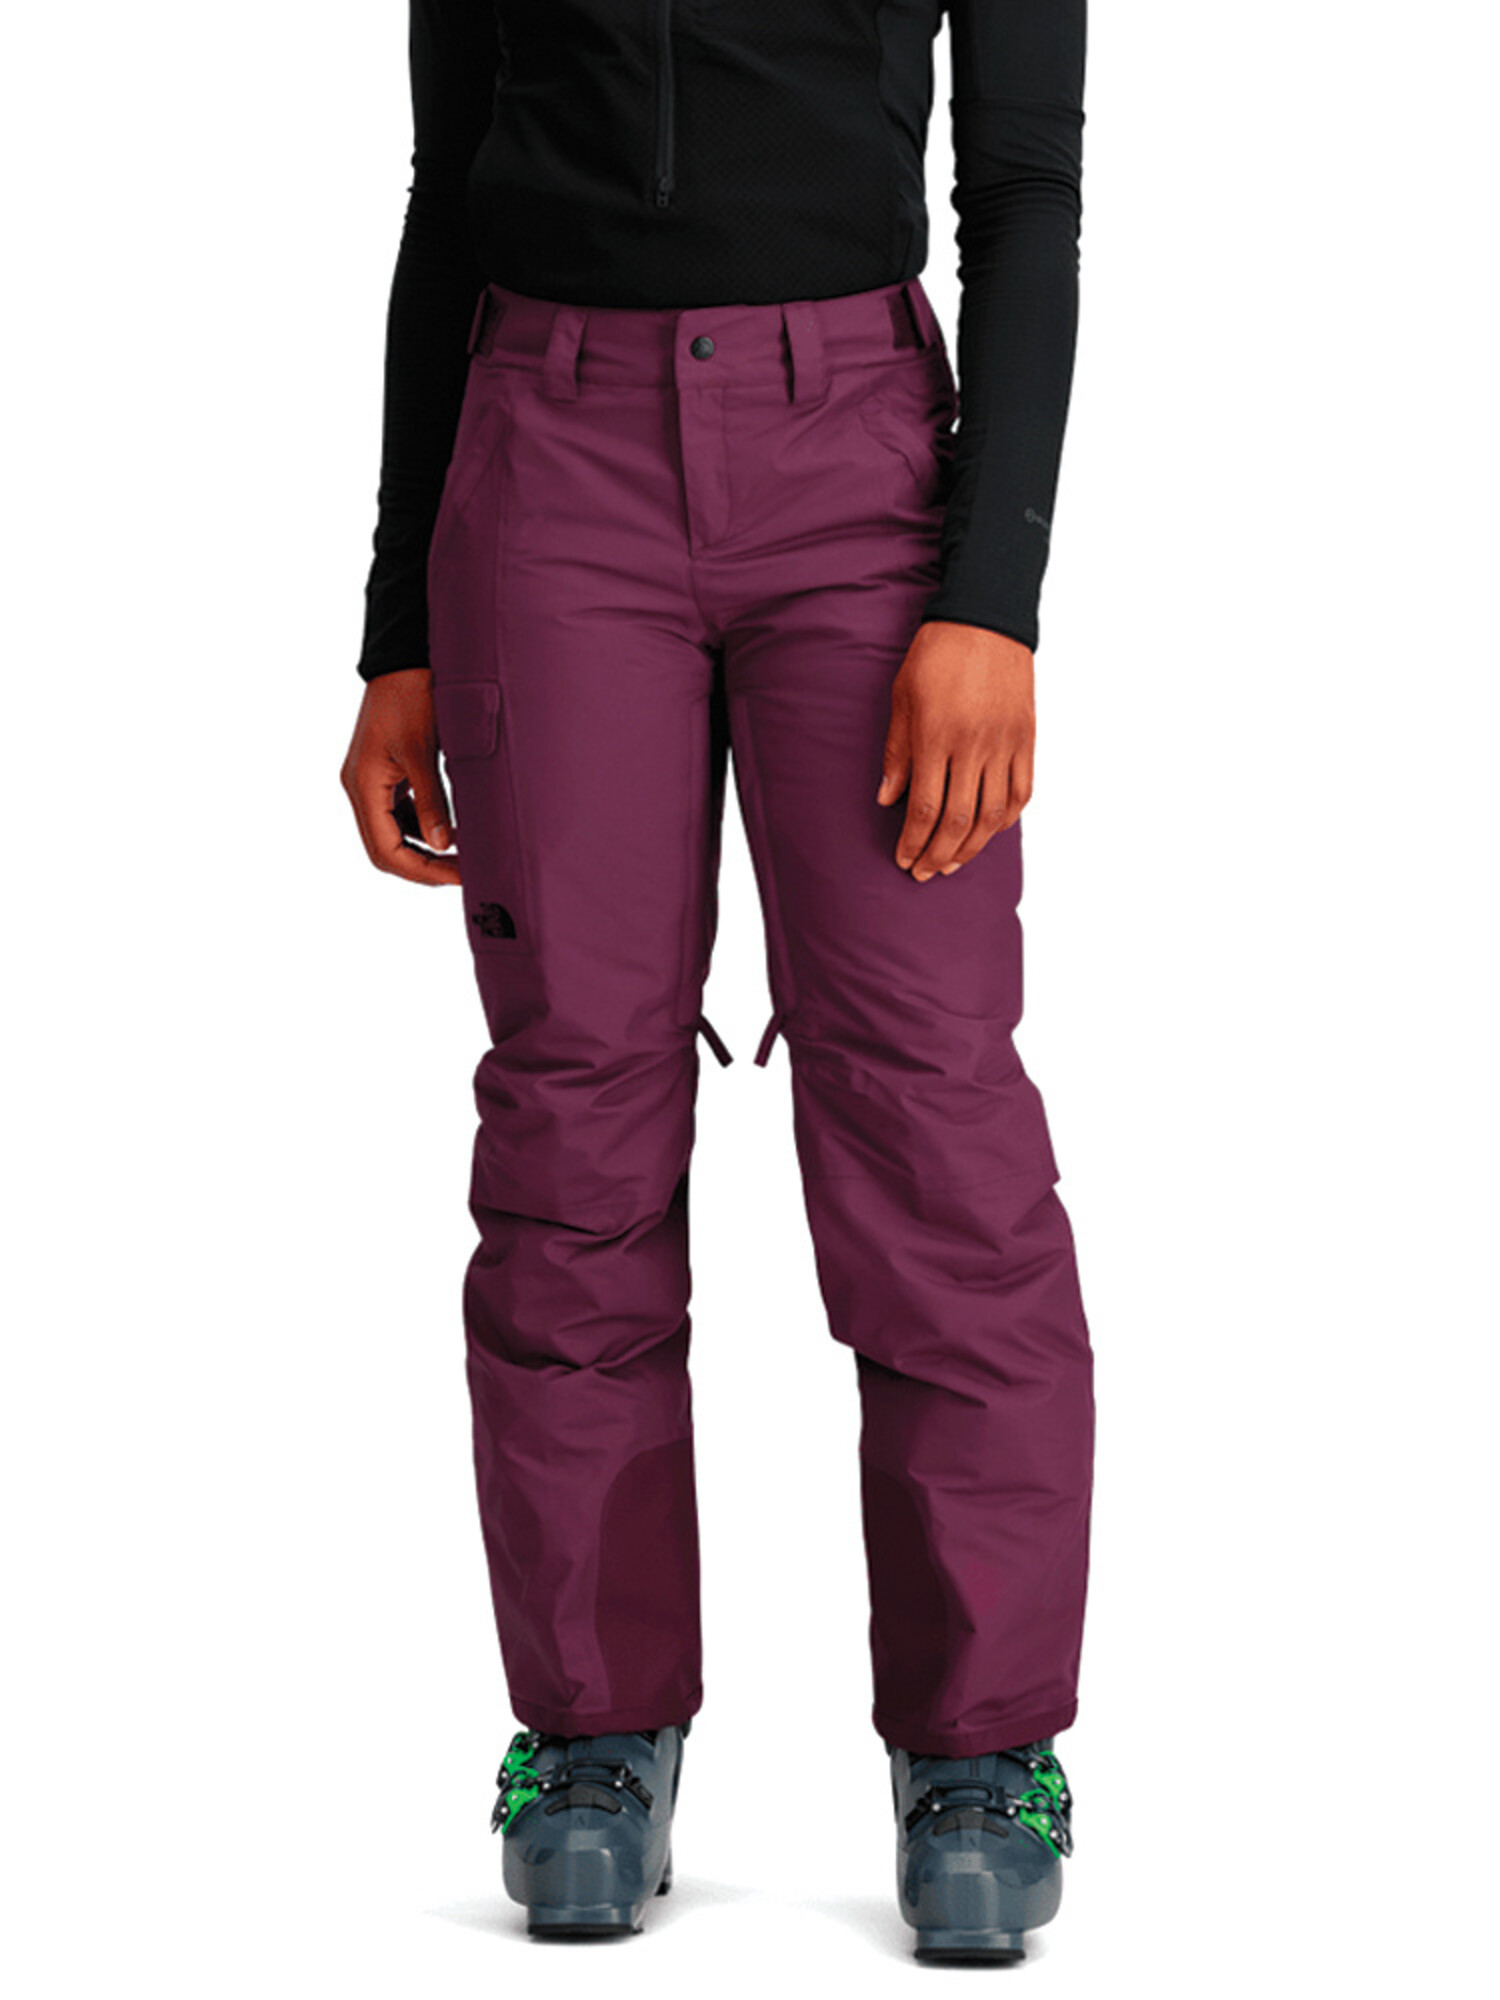 The North Face Women's Freedom Insulated Pants, Asphalt Grey